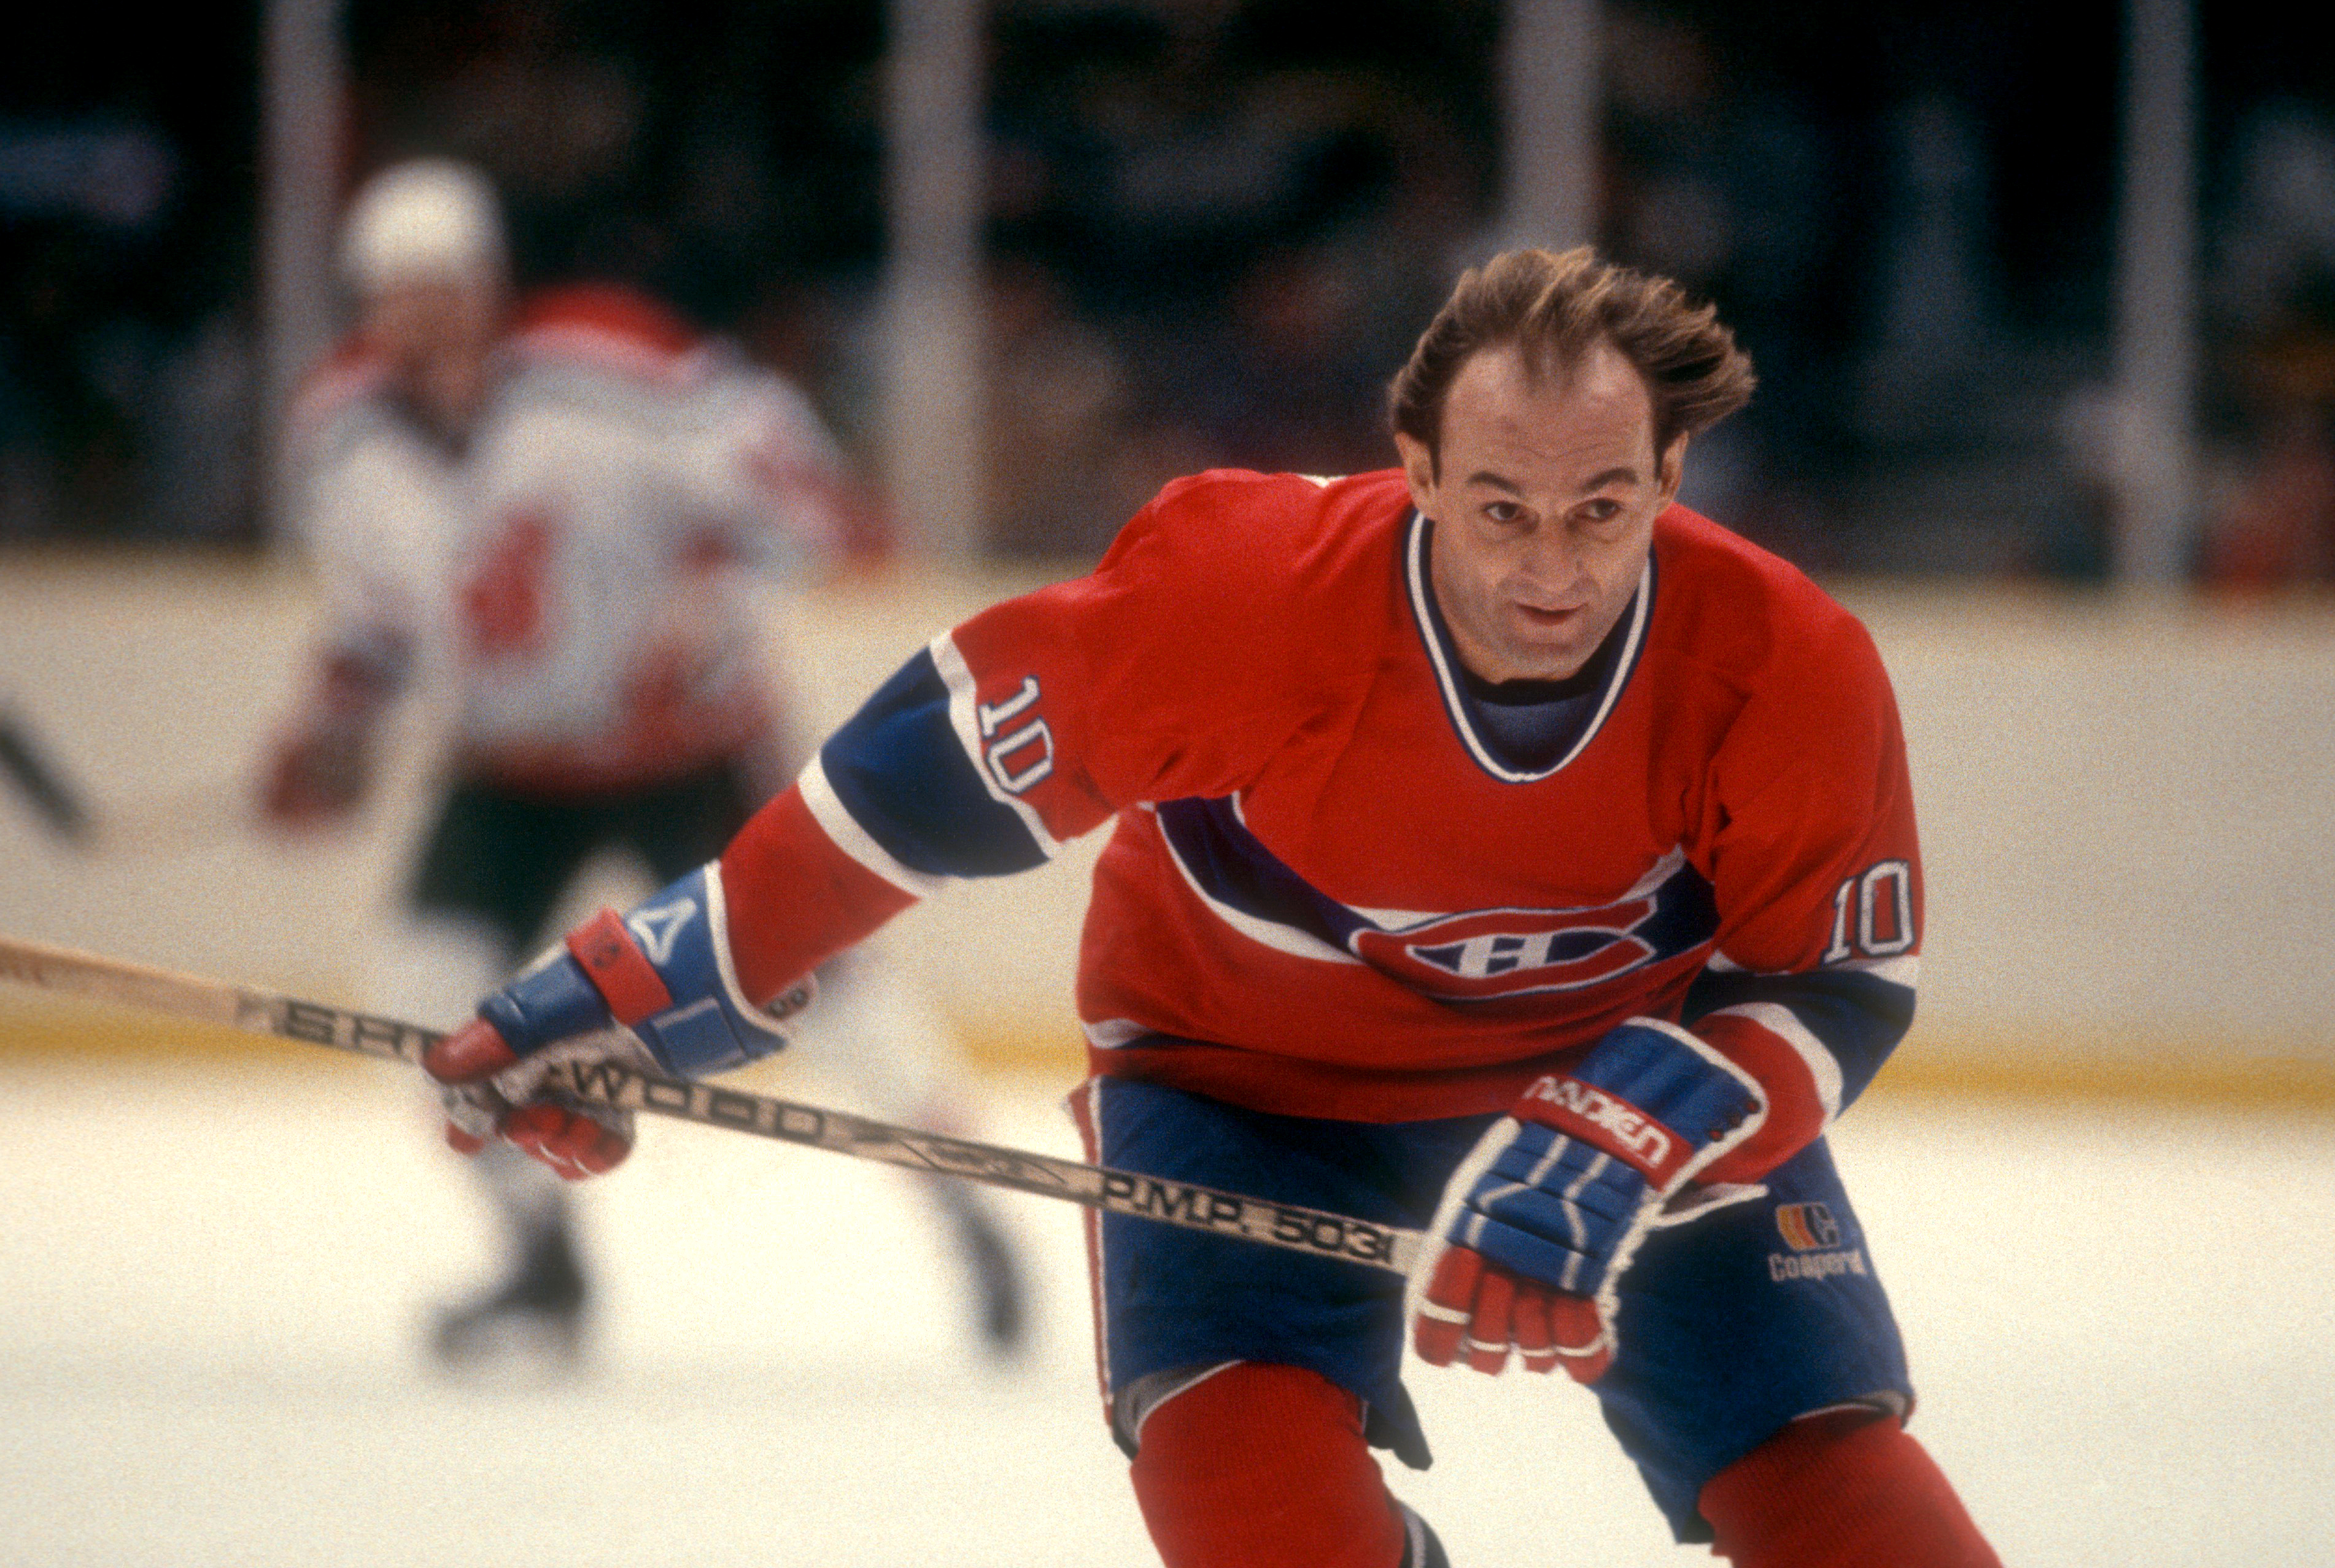 When Guy Lafleur returned to the ice in Montreal  as a New York